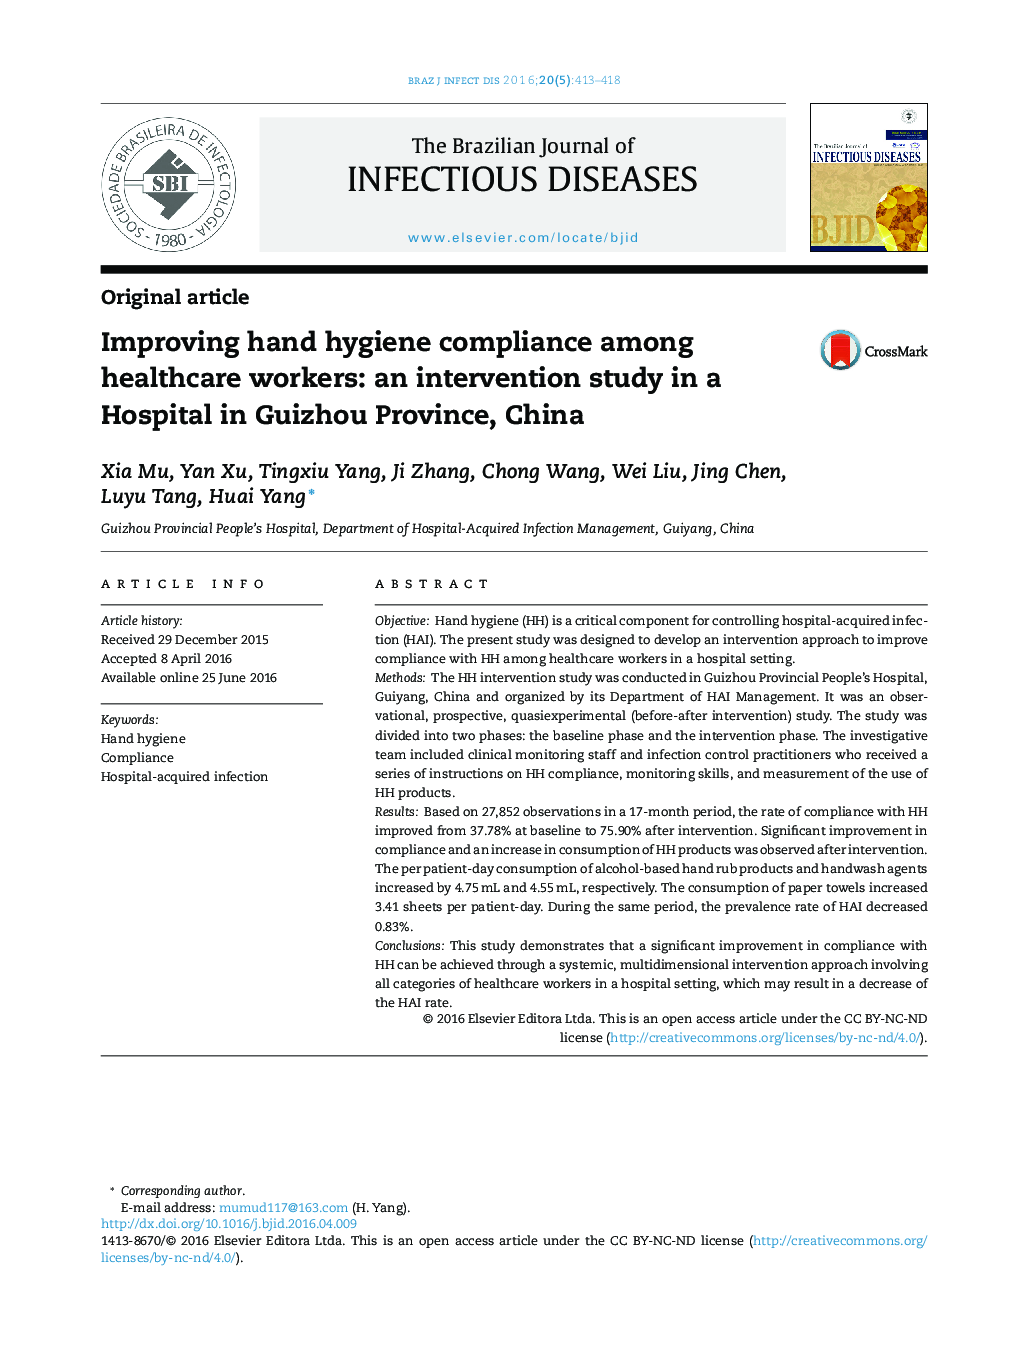 Improving hand hygiene compliance among healthcare workers: an intervention study in a Hospital in Guizhou Province, China